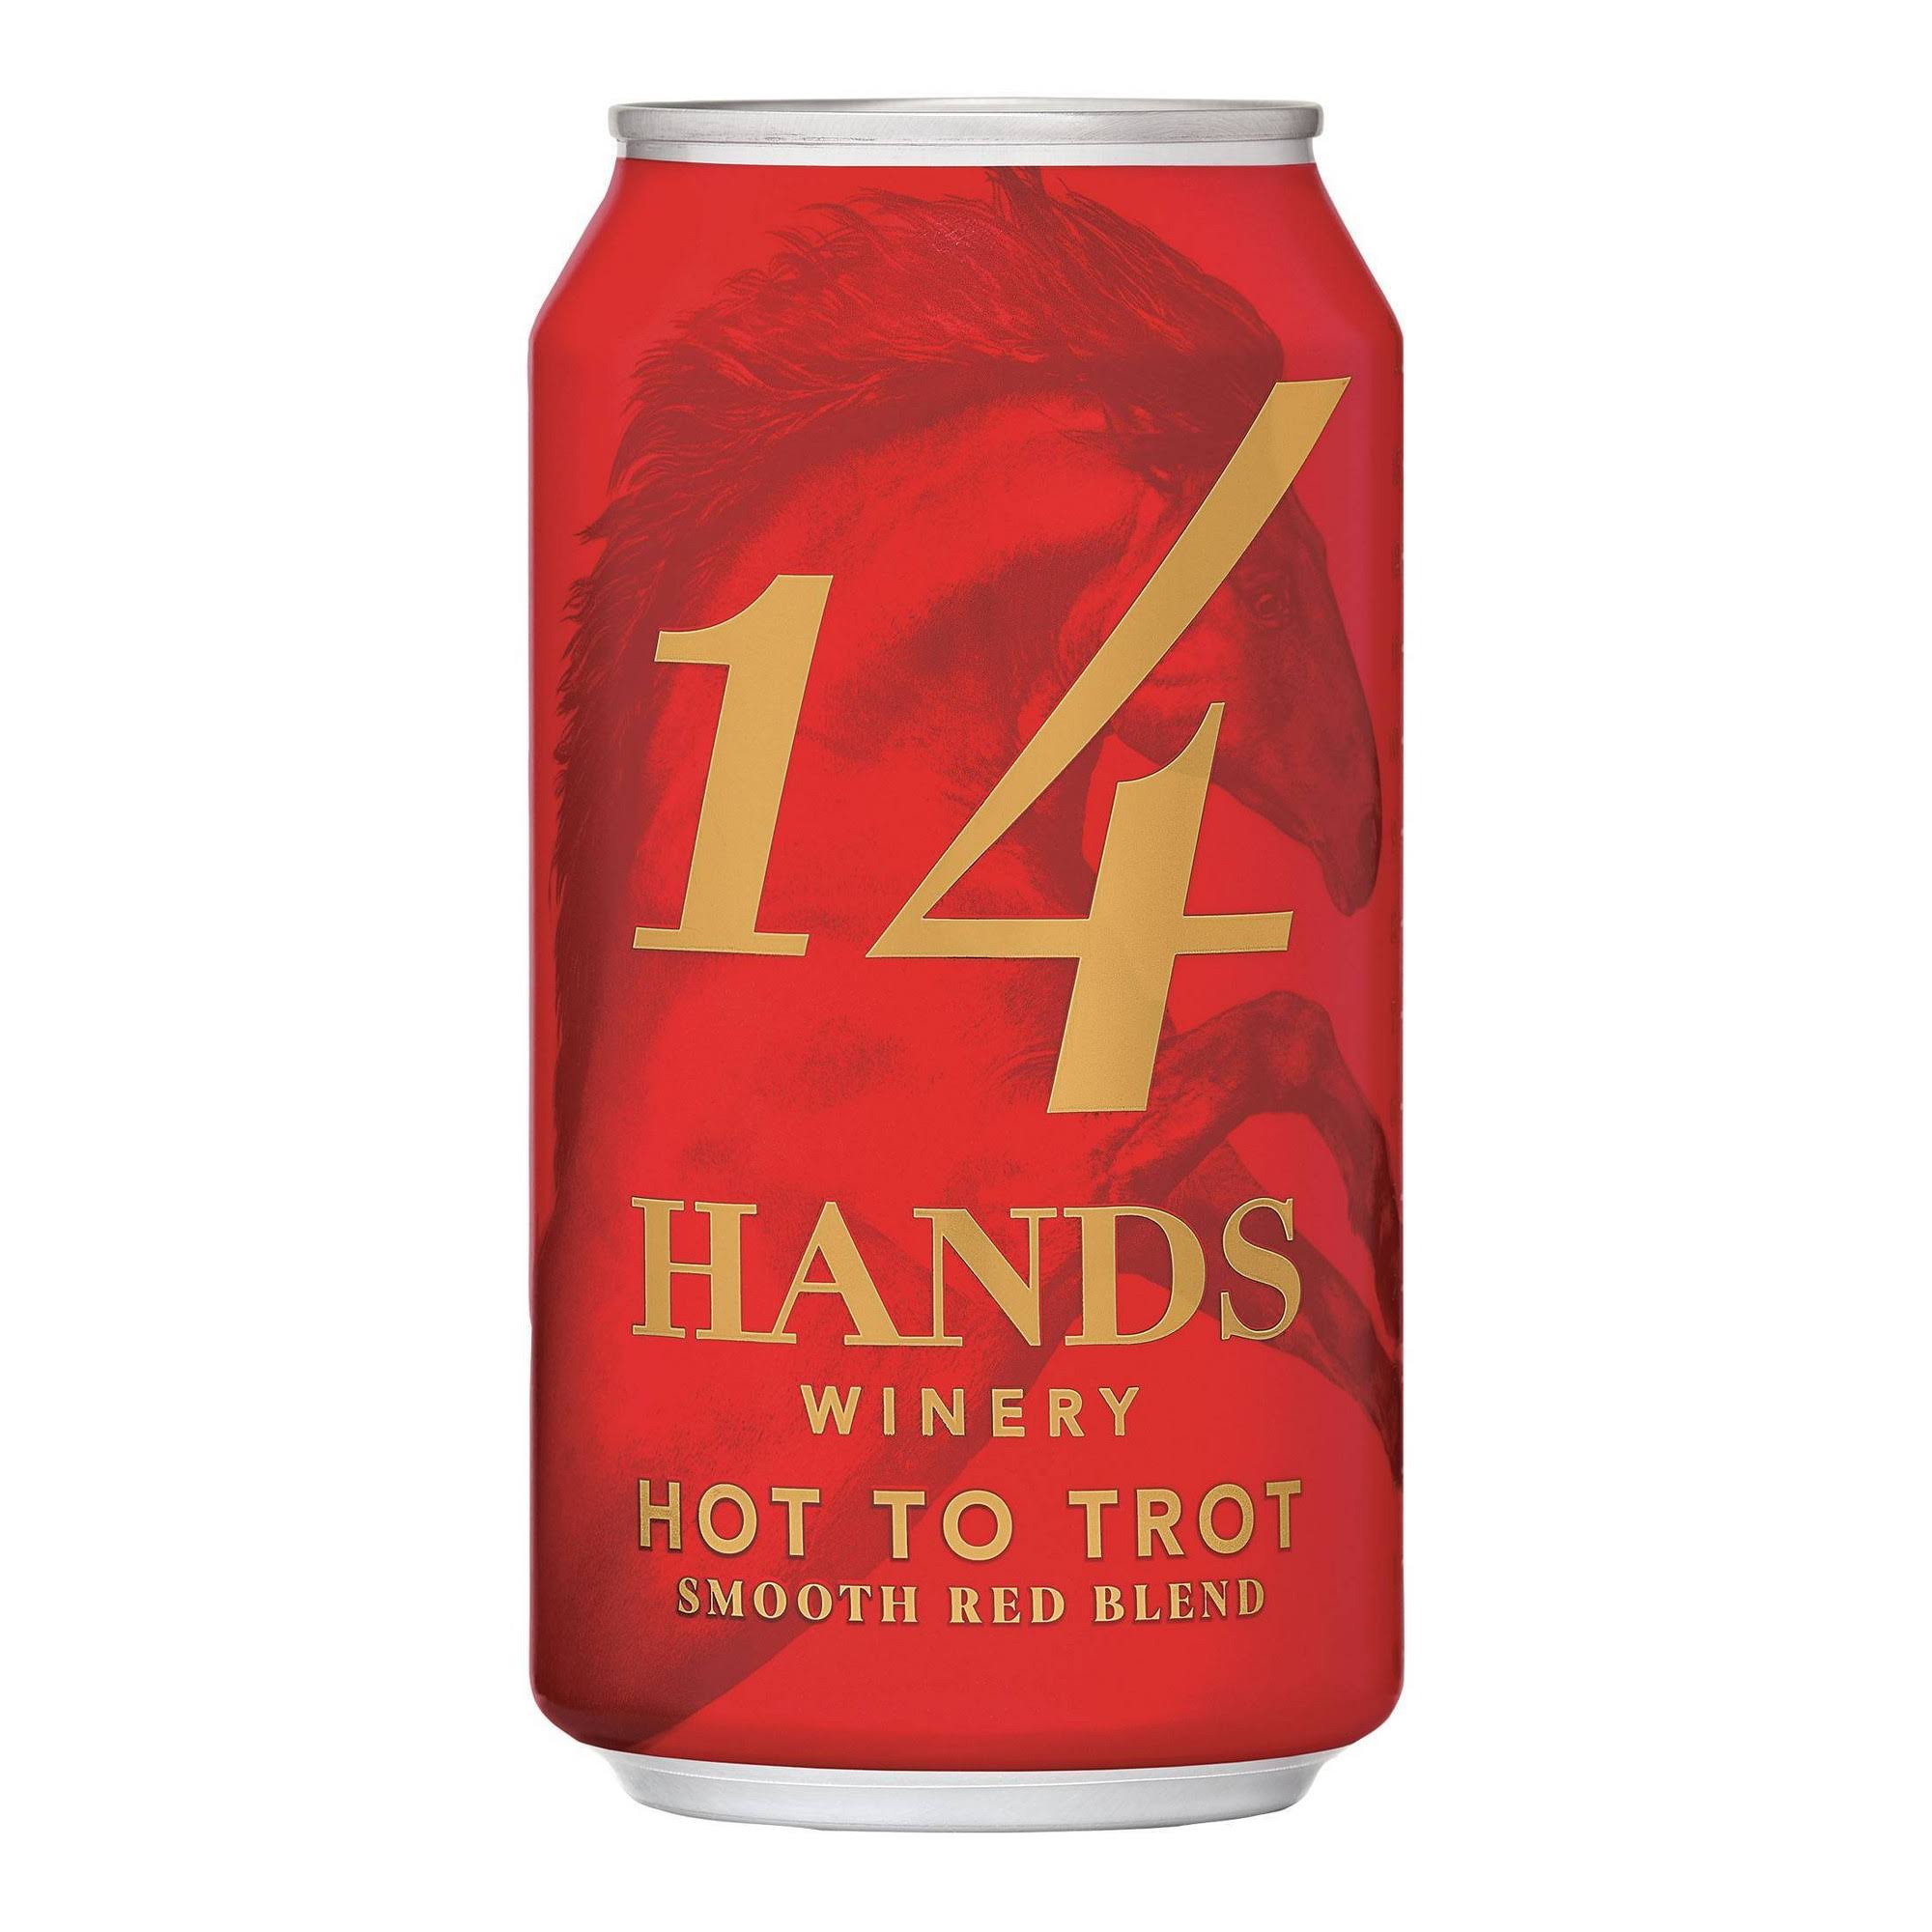 14 Hands Smooth Red Blend, Hot to Trot - 375 ml